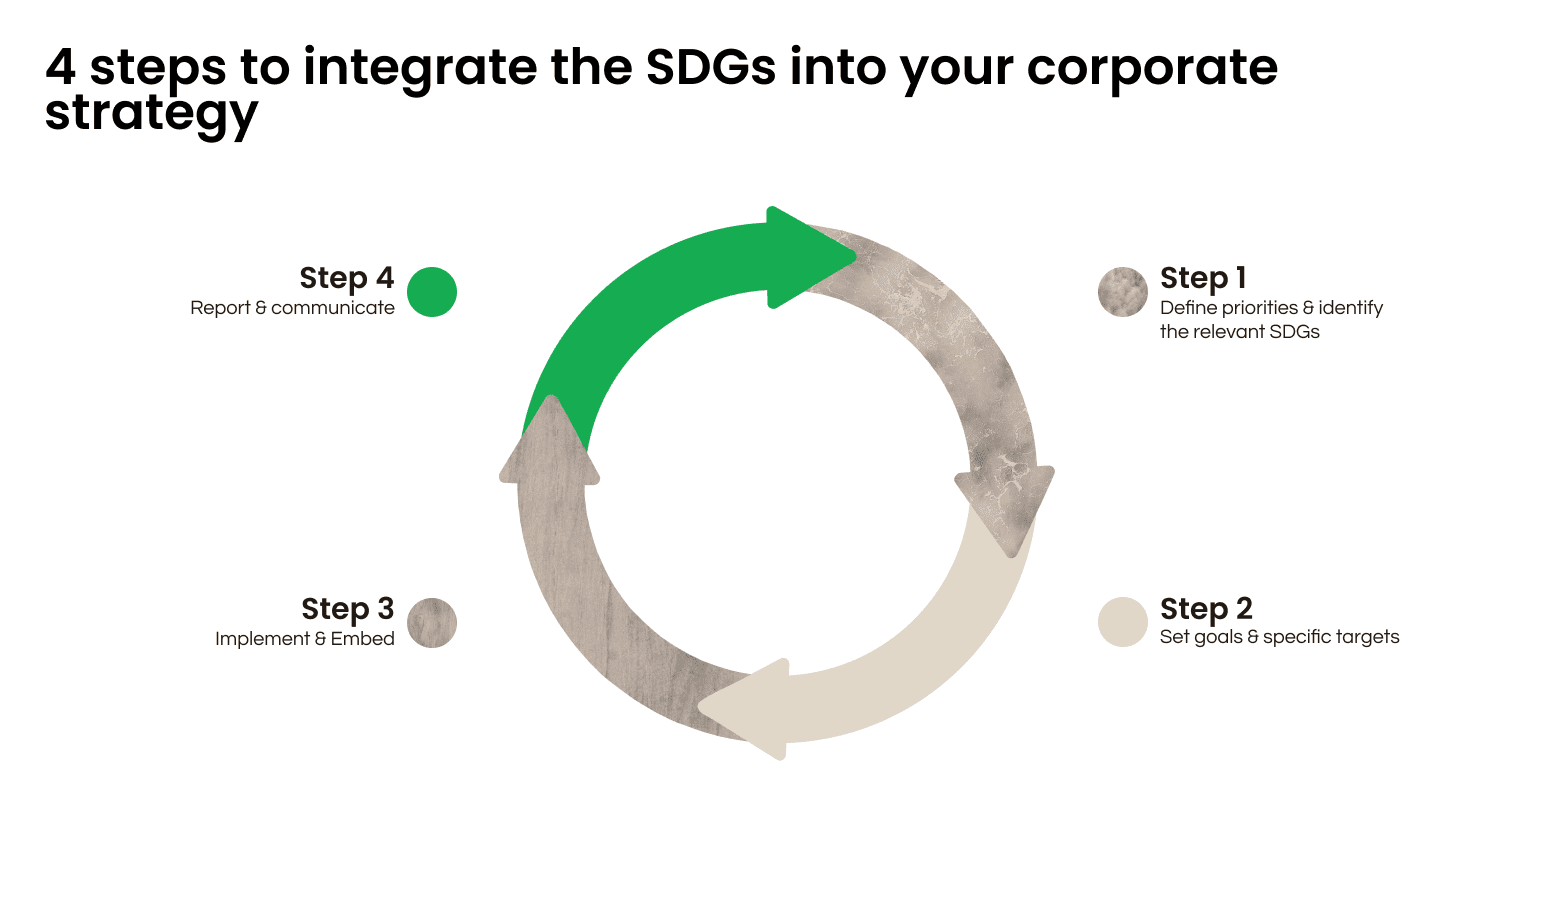 4 steps to integrate SDG into your corporate strategy